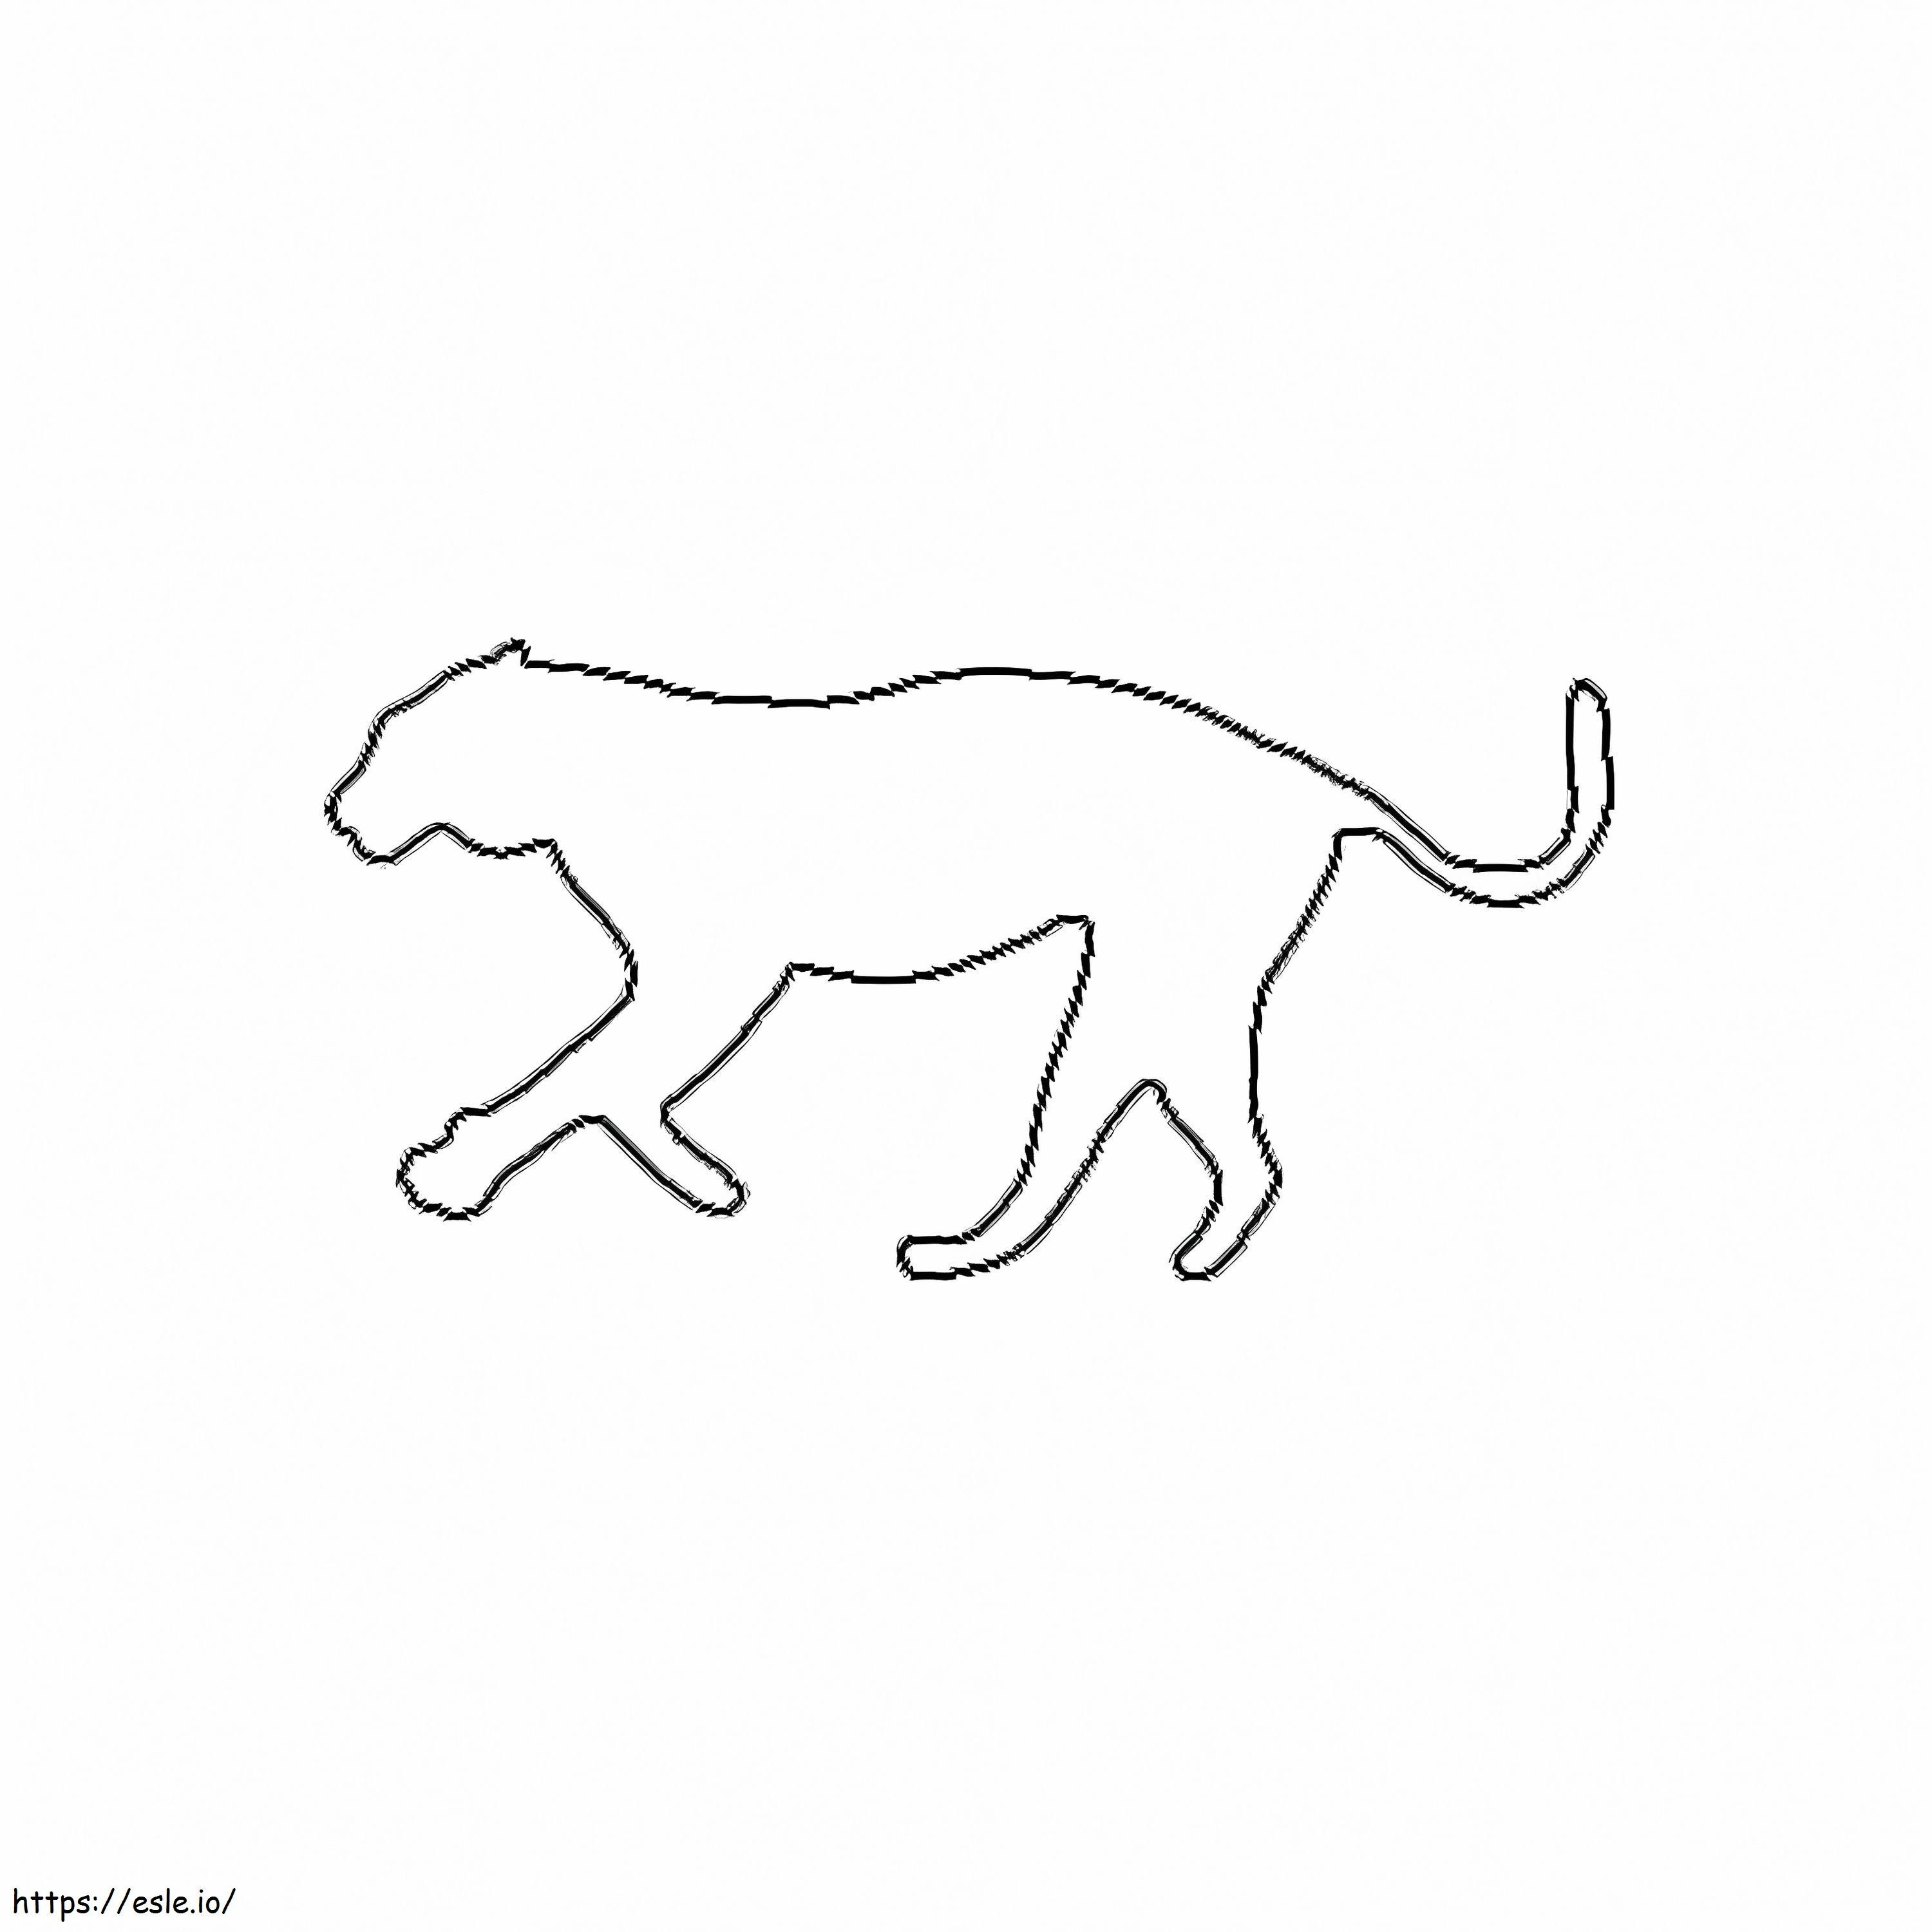 Cheetah Outline coloring page